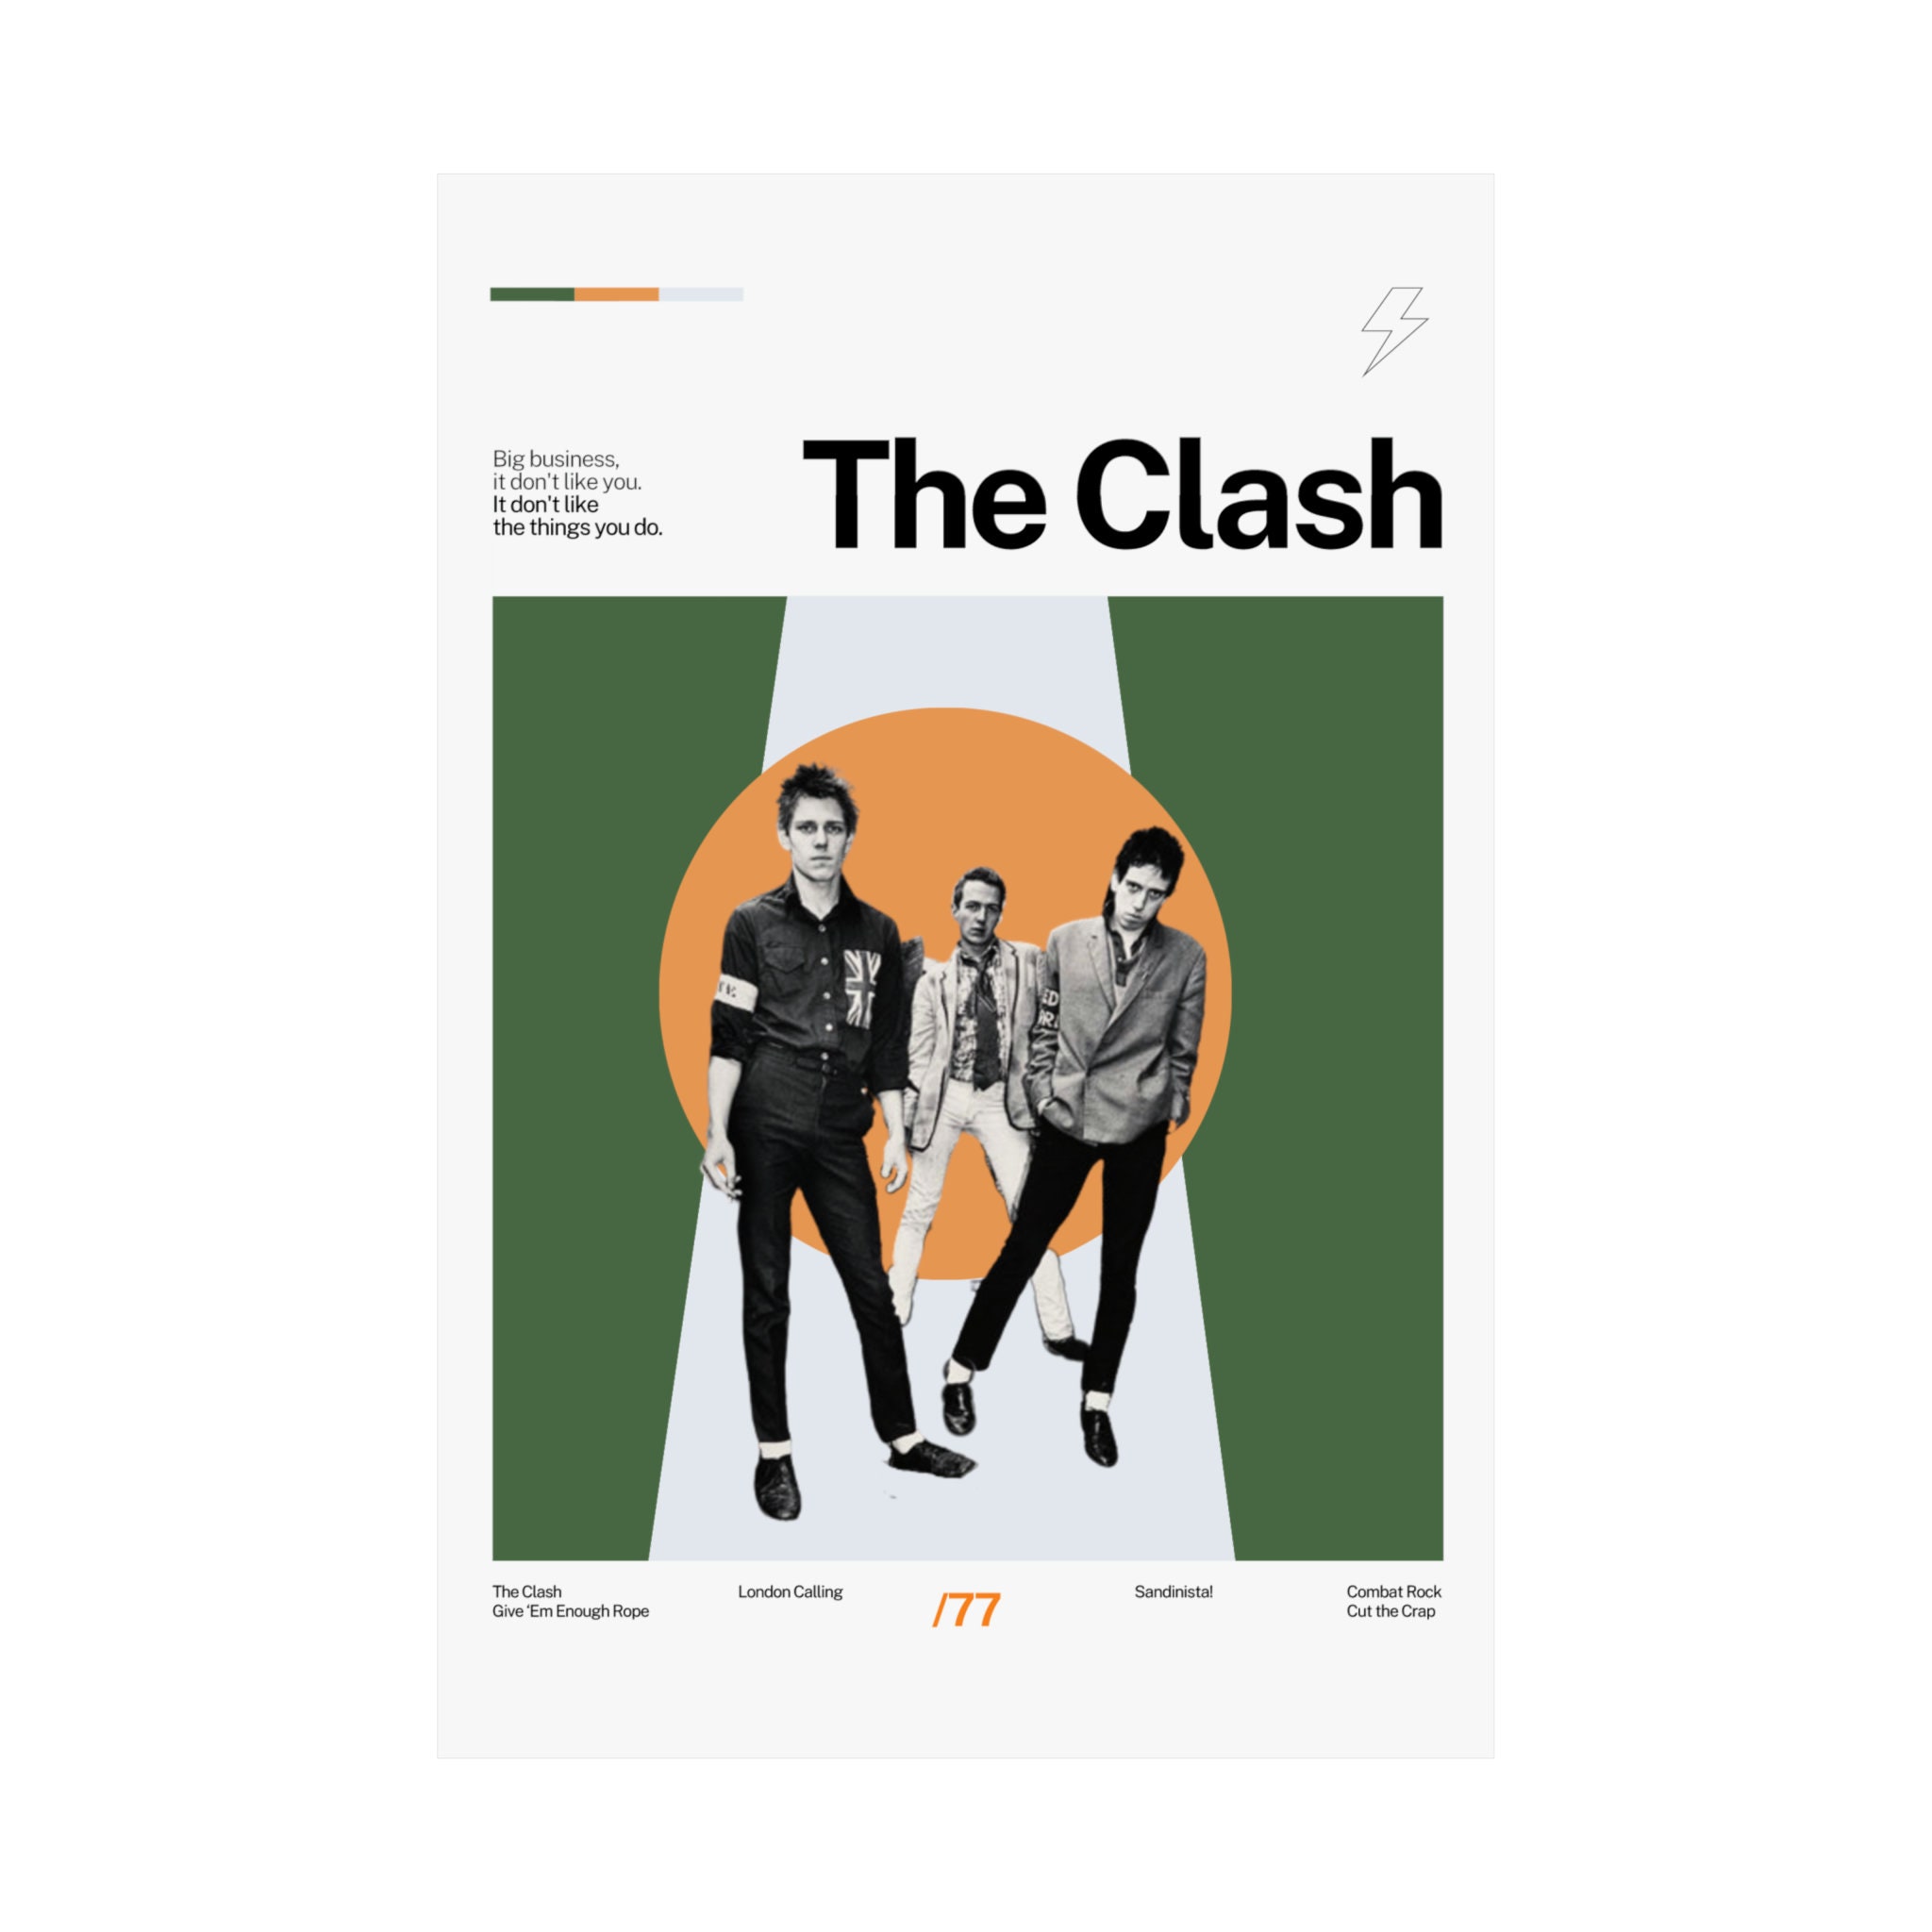 Discover The Clash Poster - Punk Rock Poster, Music Poster, Print Art Poster, Minimalist Art